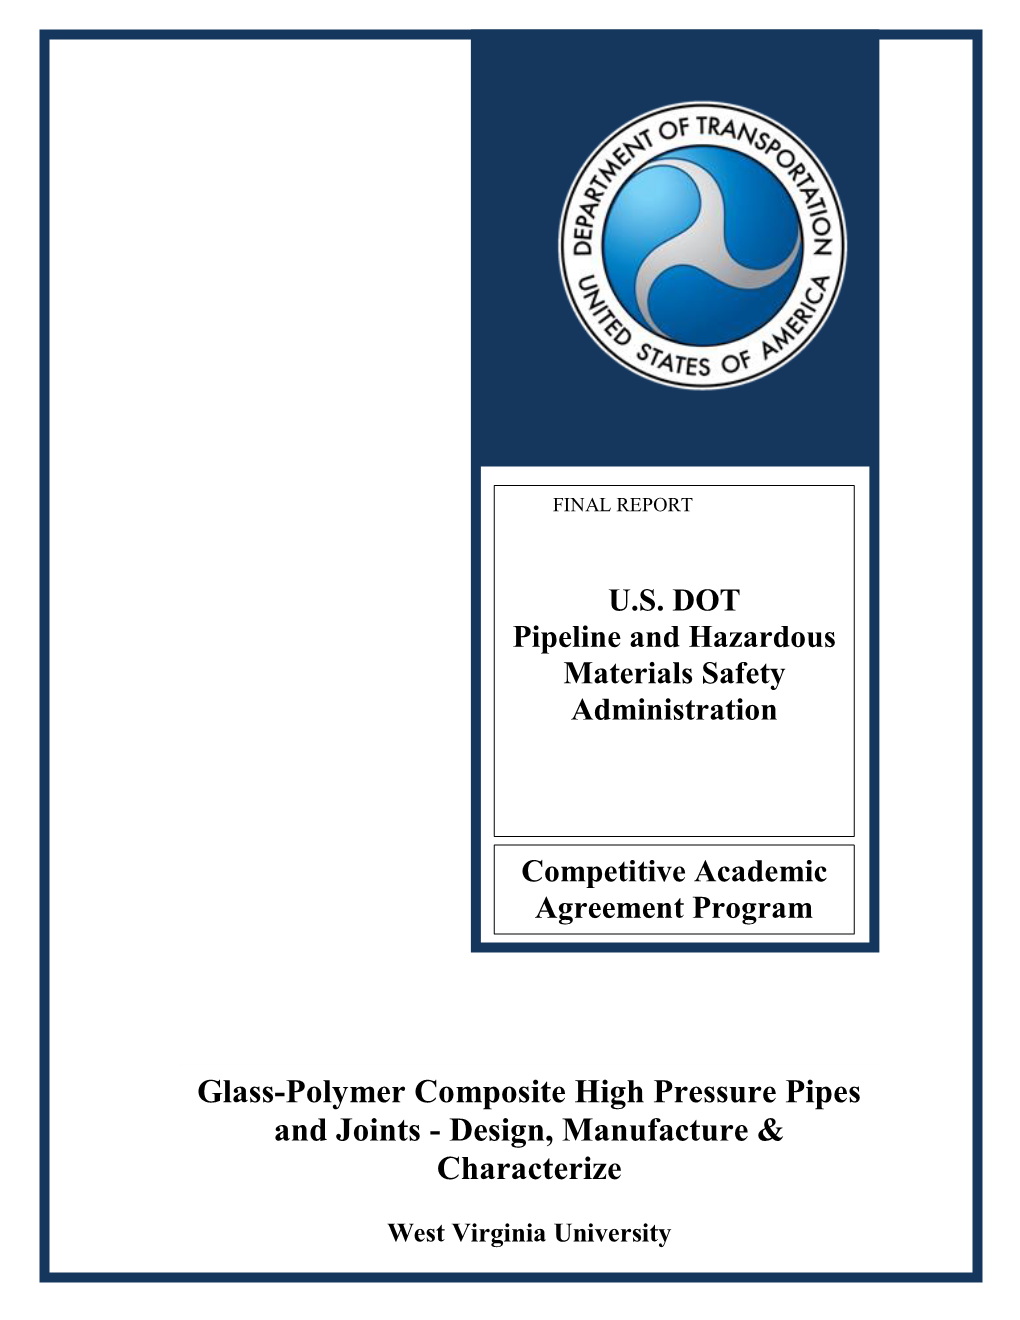 Glass-Polymer Composite High Pressure Pipes and Joints - Design, Manufacture & Characterize